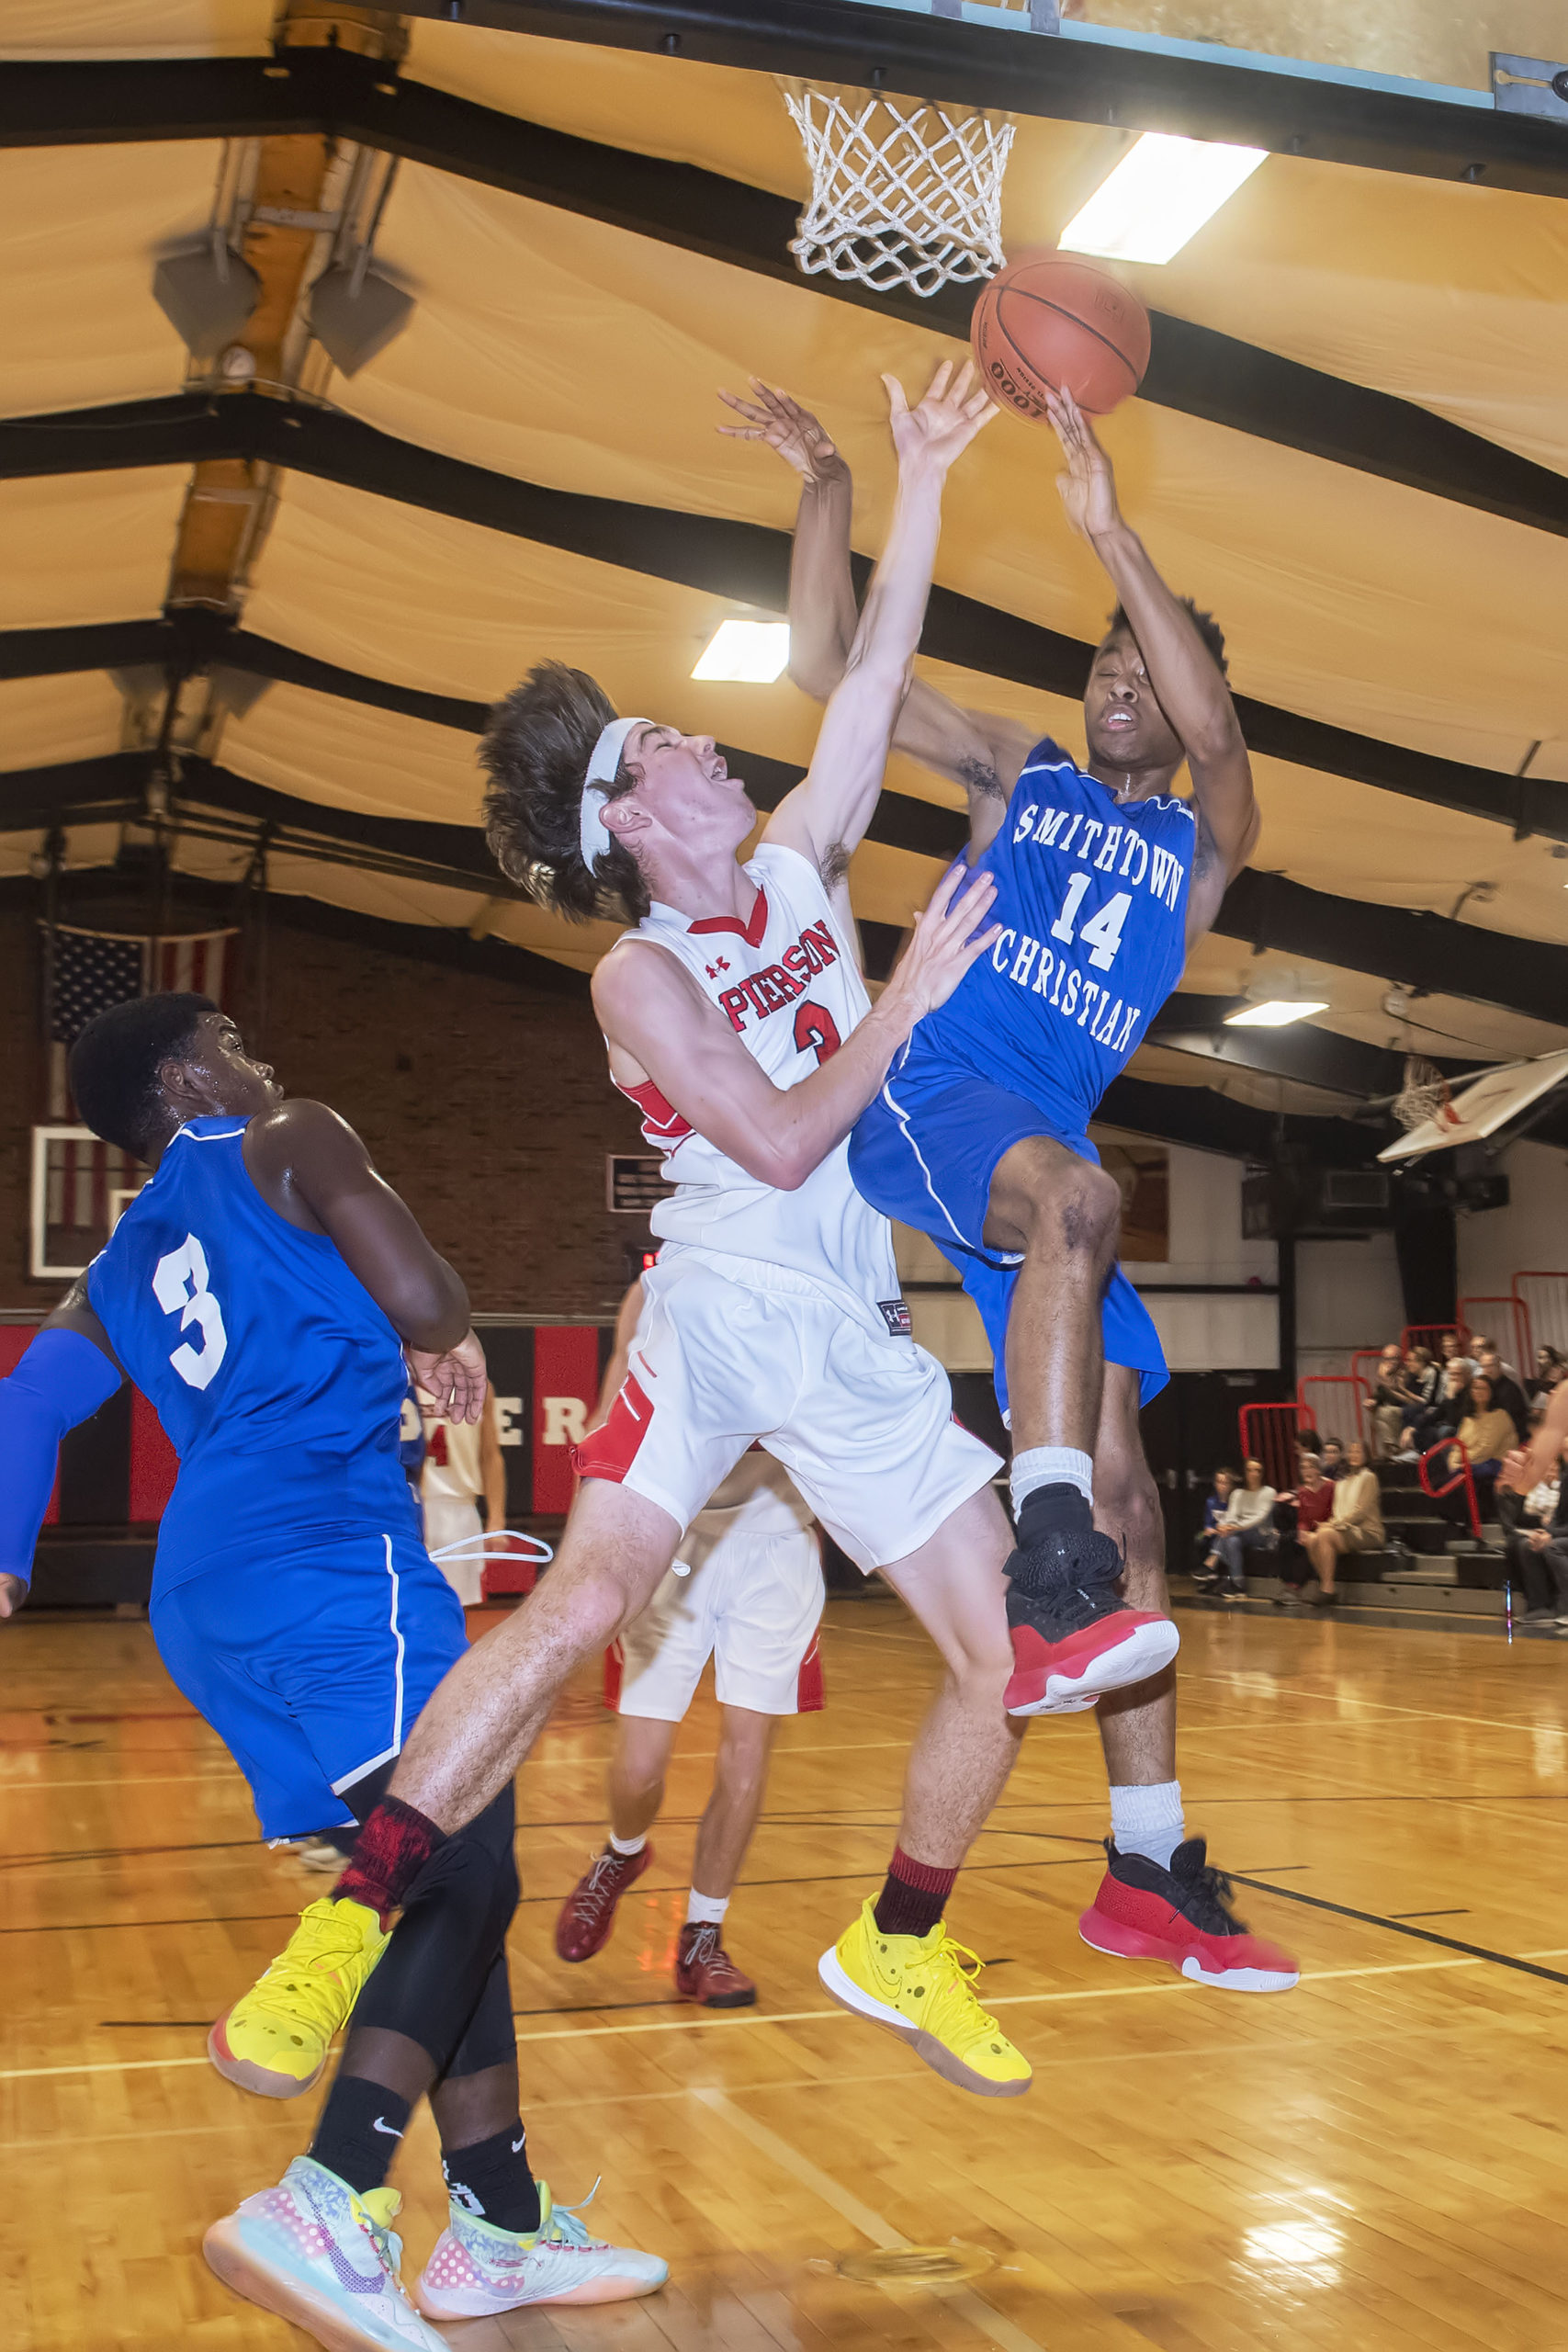 Pierson's Henry Brooks goes up with a Smithtown Christian player for the ball.